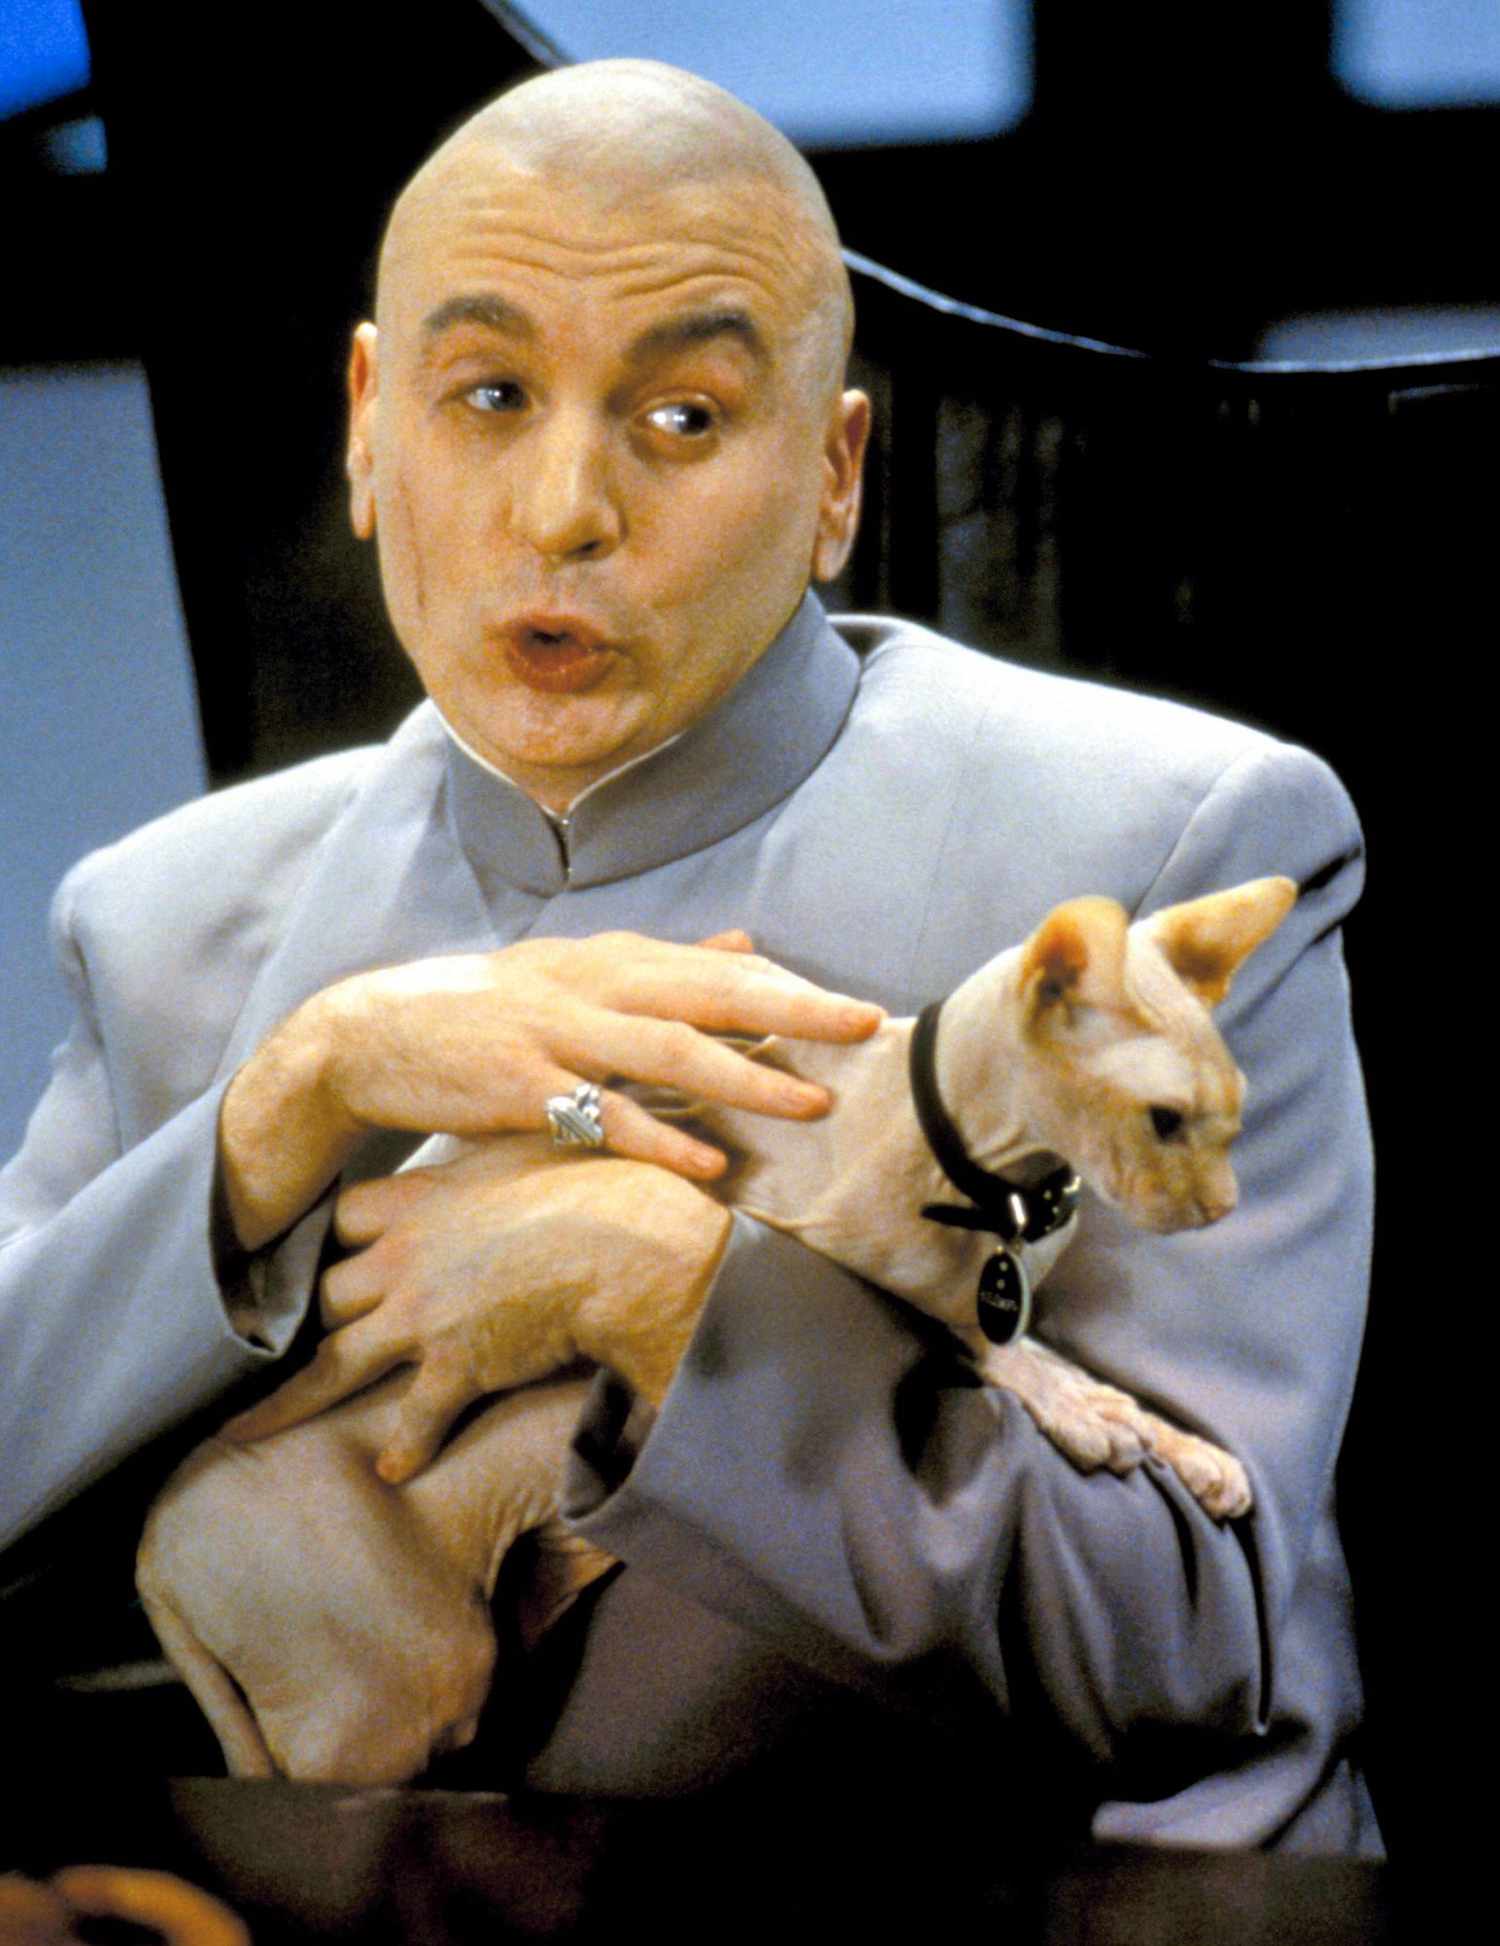 20. Mr. Bigglesworth from the Austin Powers series